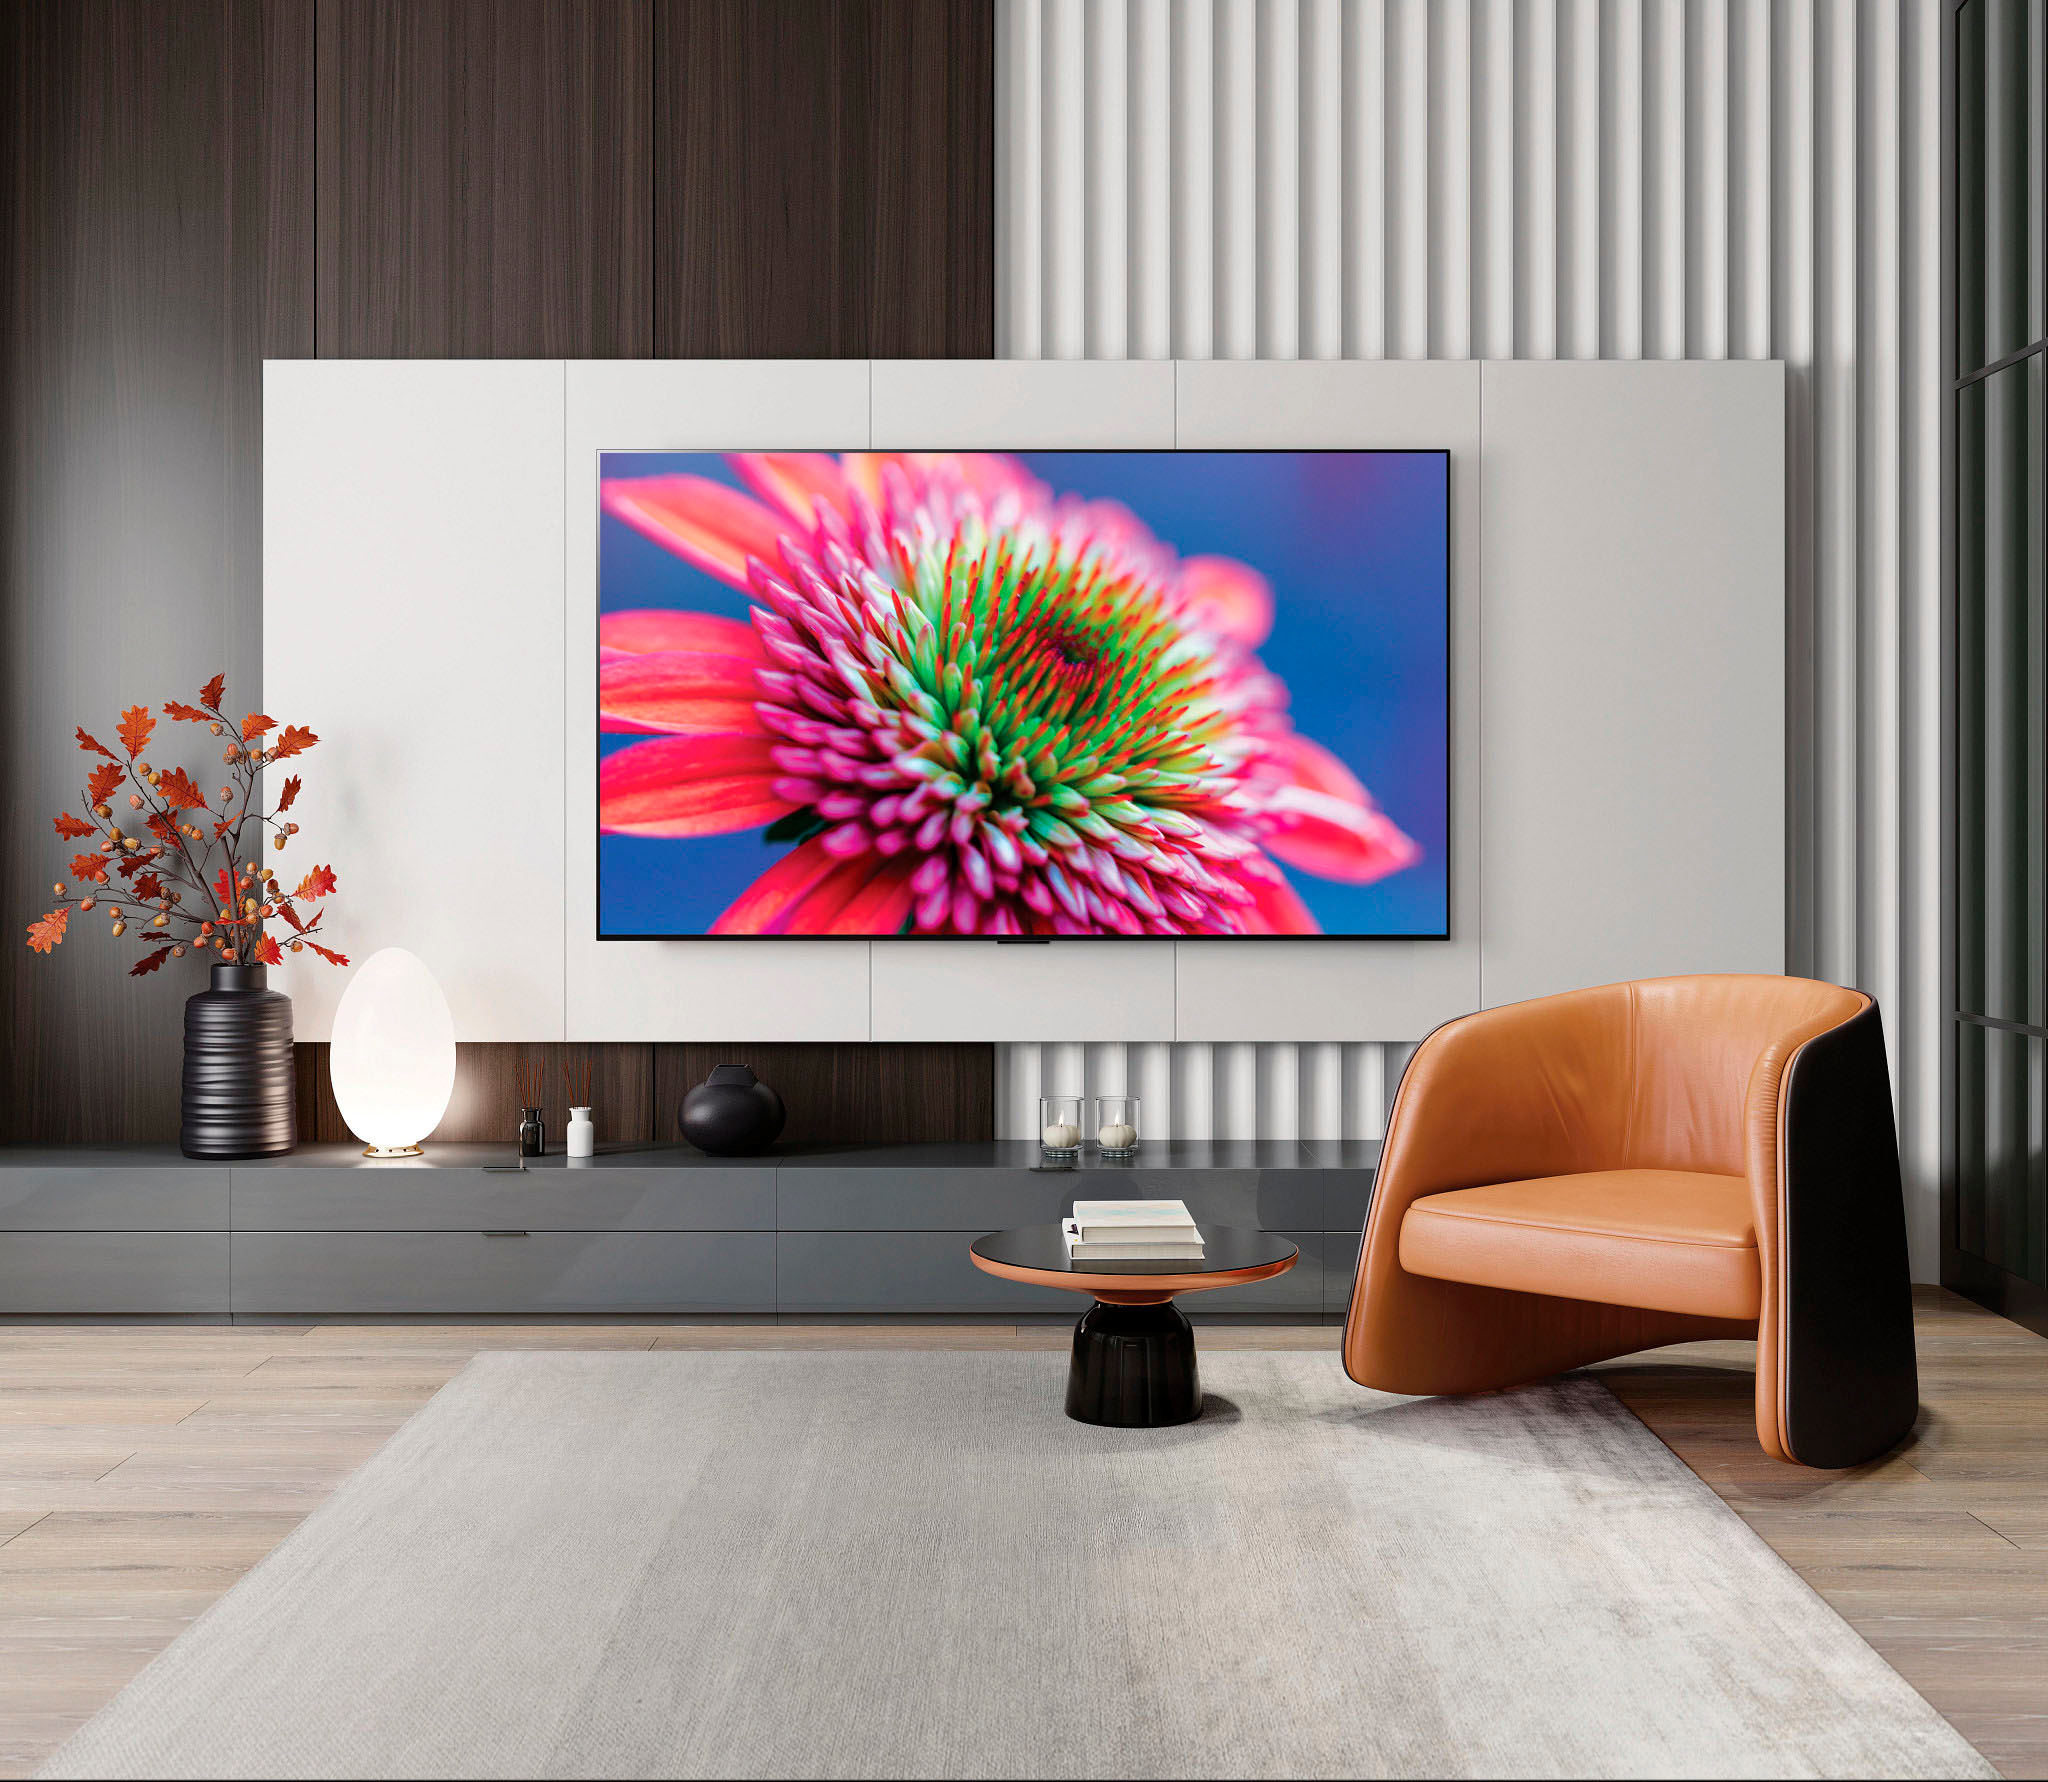  LG 83-Inch Class OLED evo Gallery Edition G2 Series Alexa  Built-in 4K Smart TV, 120Hz Refresh Rate, AI-Powered, Dolby Vision IQ and  Dolby Atmos, WiSA Ready, Cloud Gaming (OLED83G2PUA, 2022), Silver 